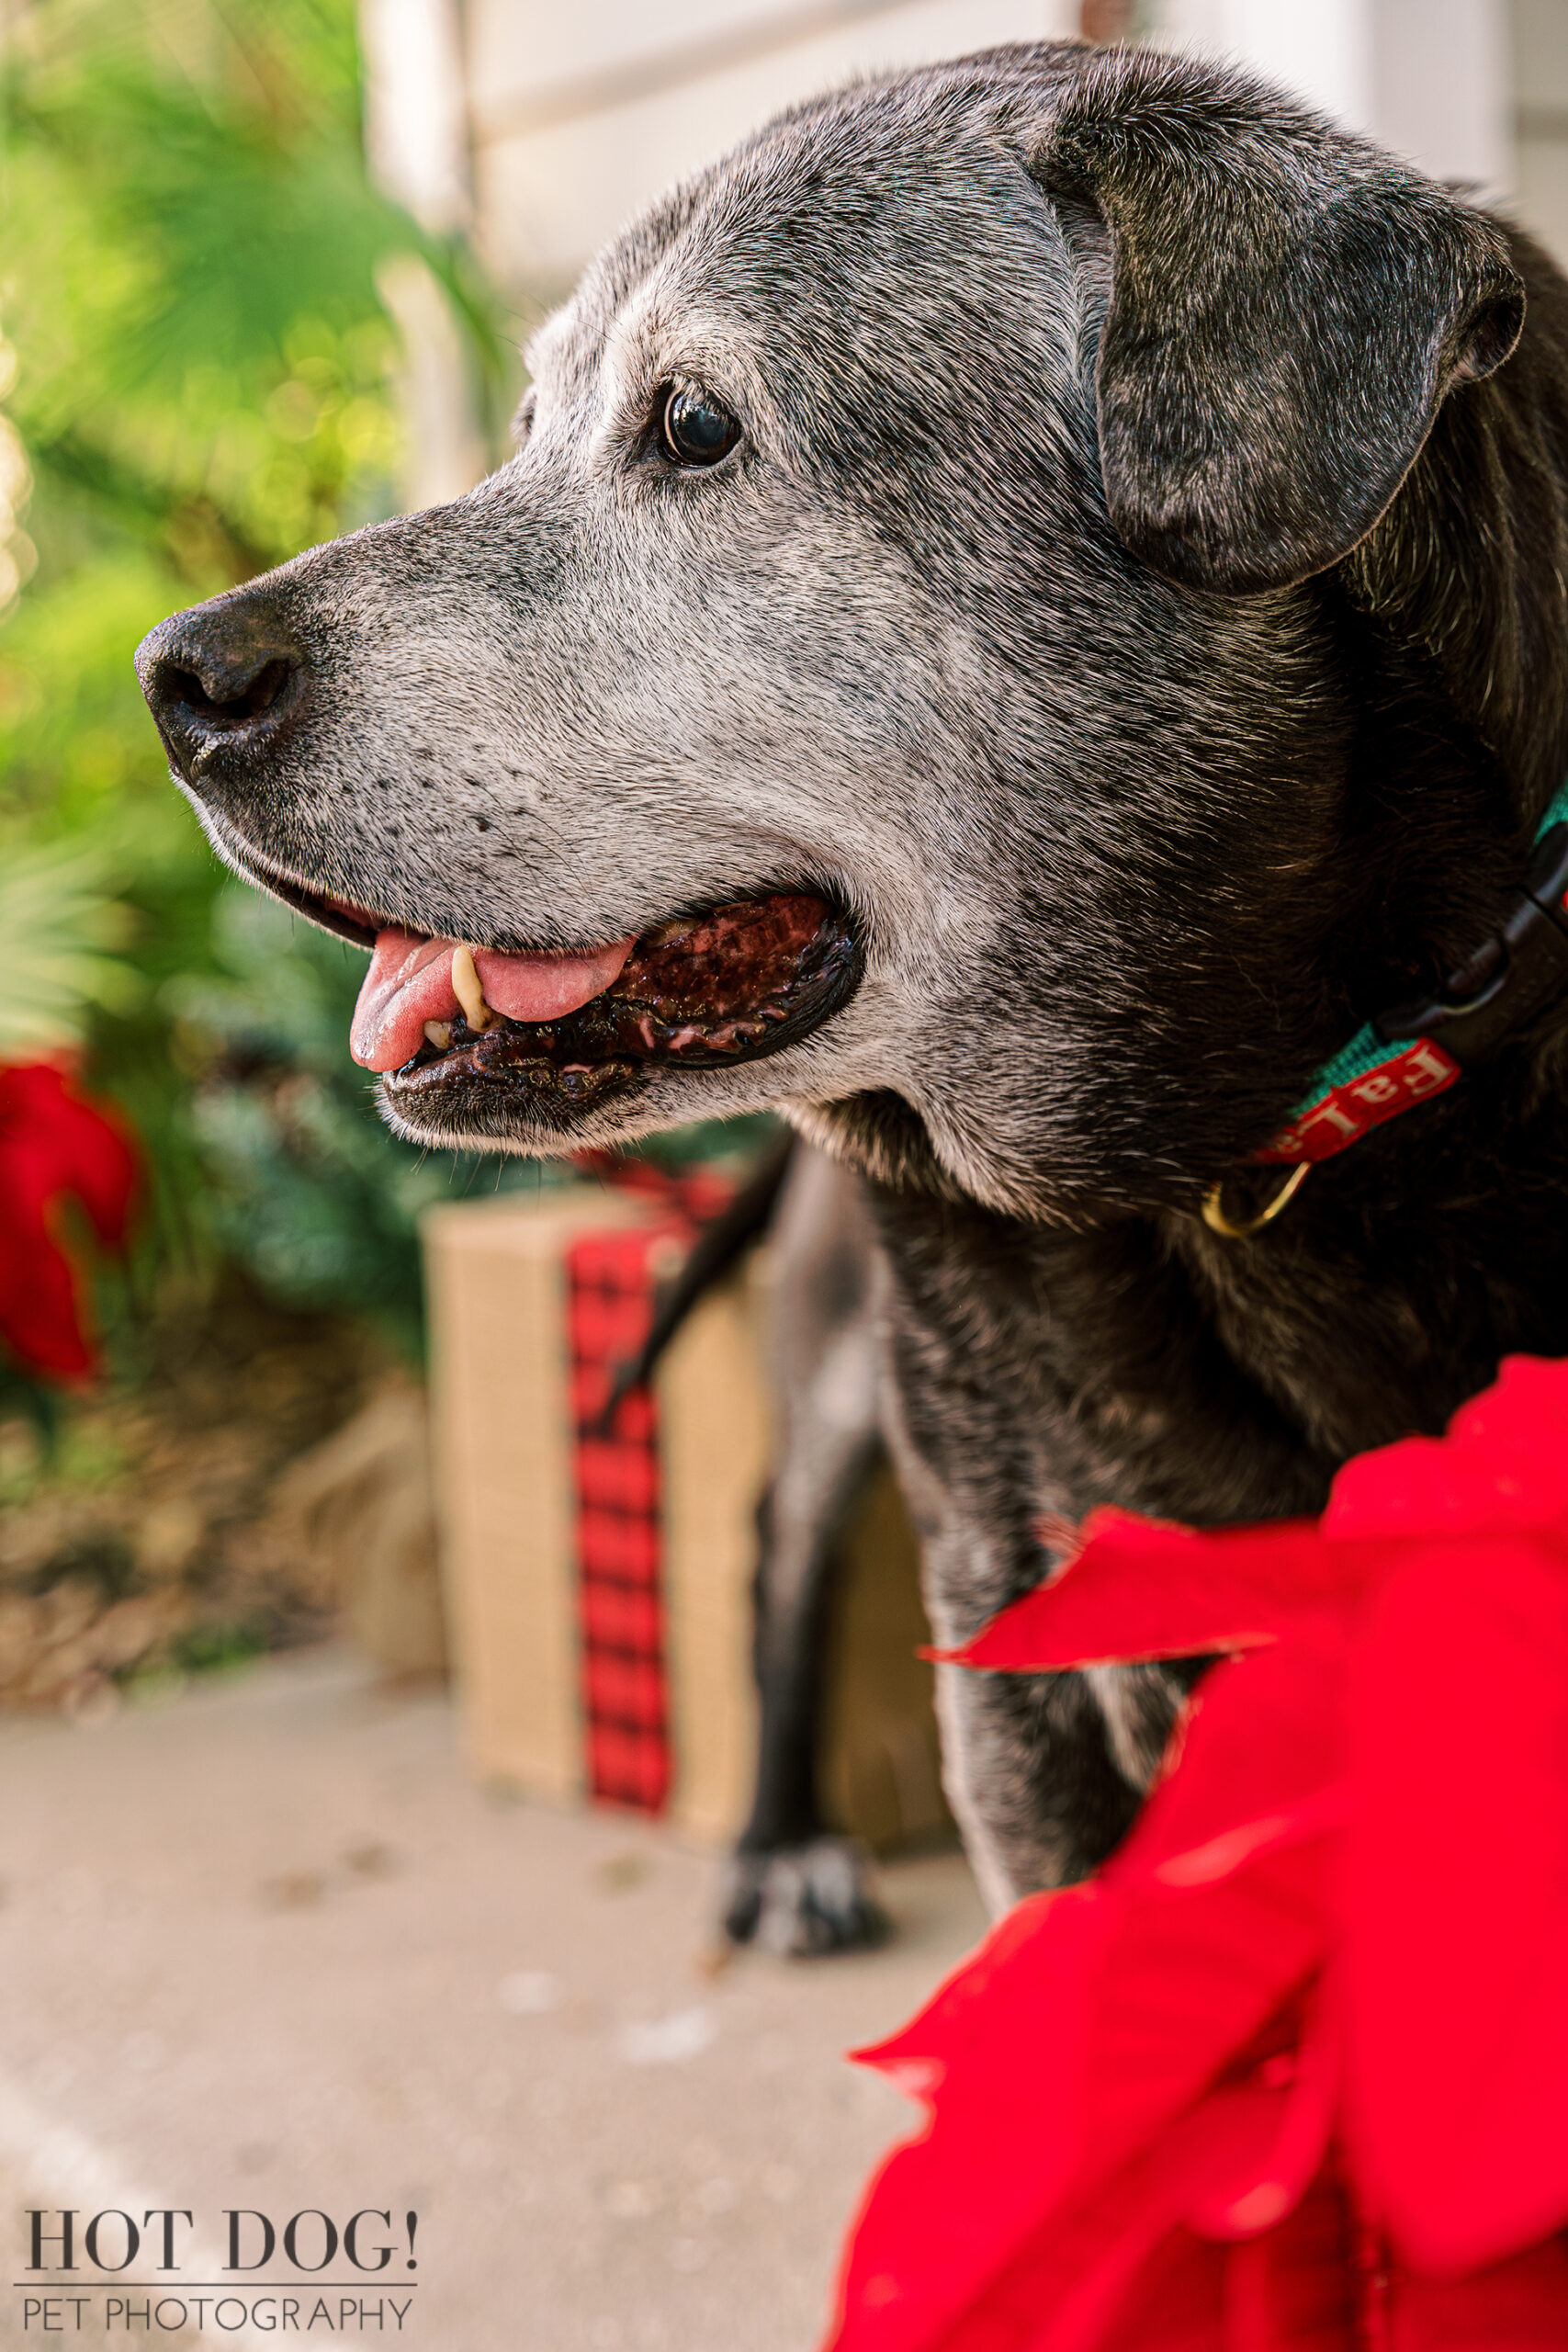 Senior Soul, Santa Spirit! Lambeau embodies the joy of the season with his gentle gaze and festive surroundings, reminding us of the true meaning of Christmas. (Photo by Hot Dog! Pet Photography)